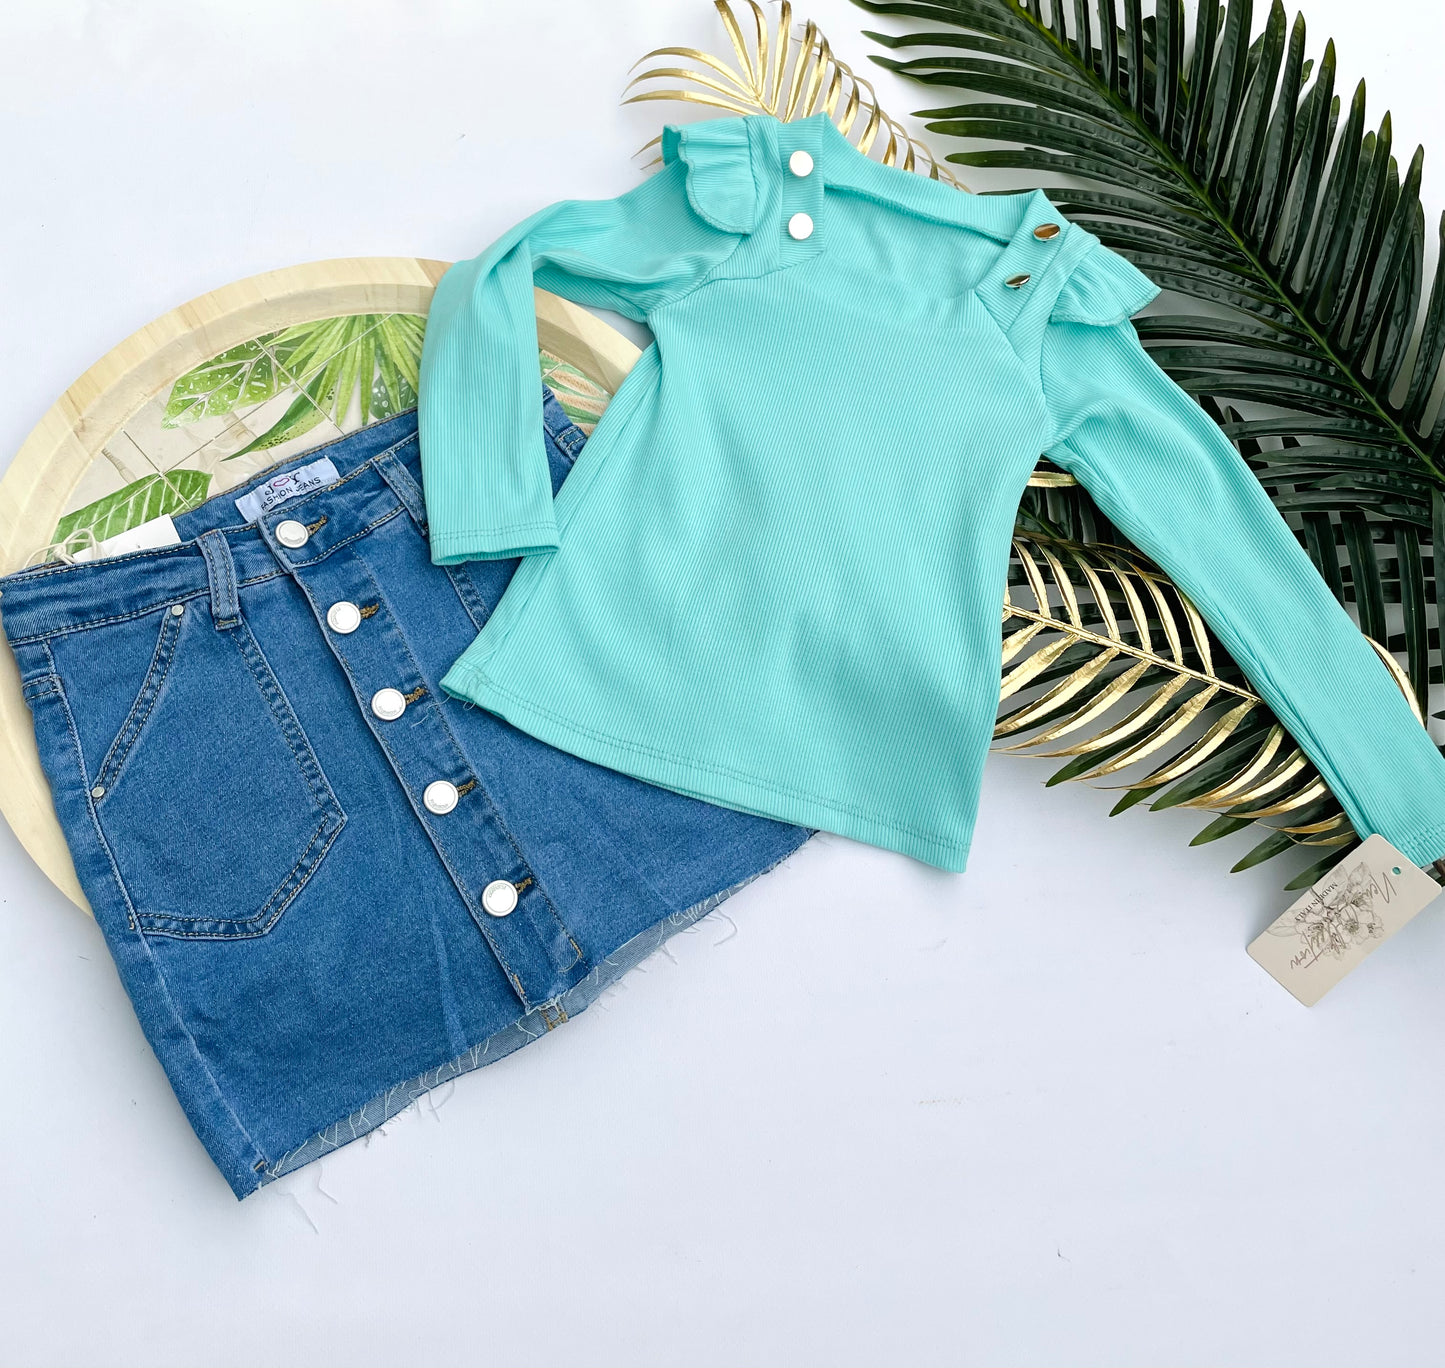 Mint top with buttons